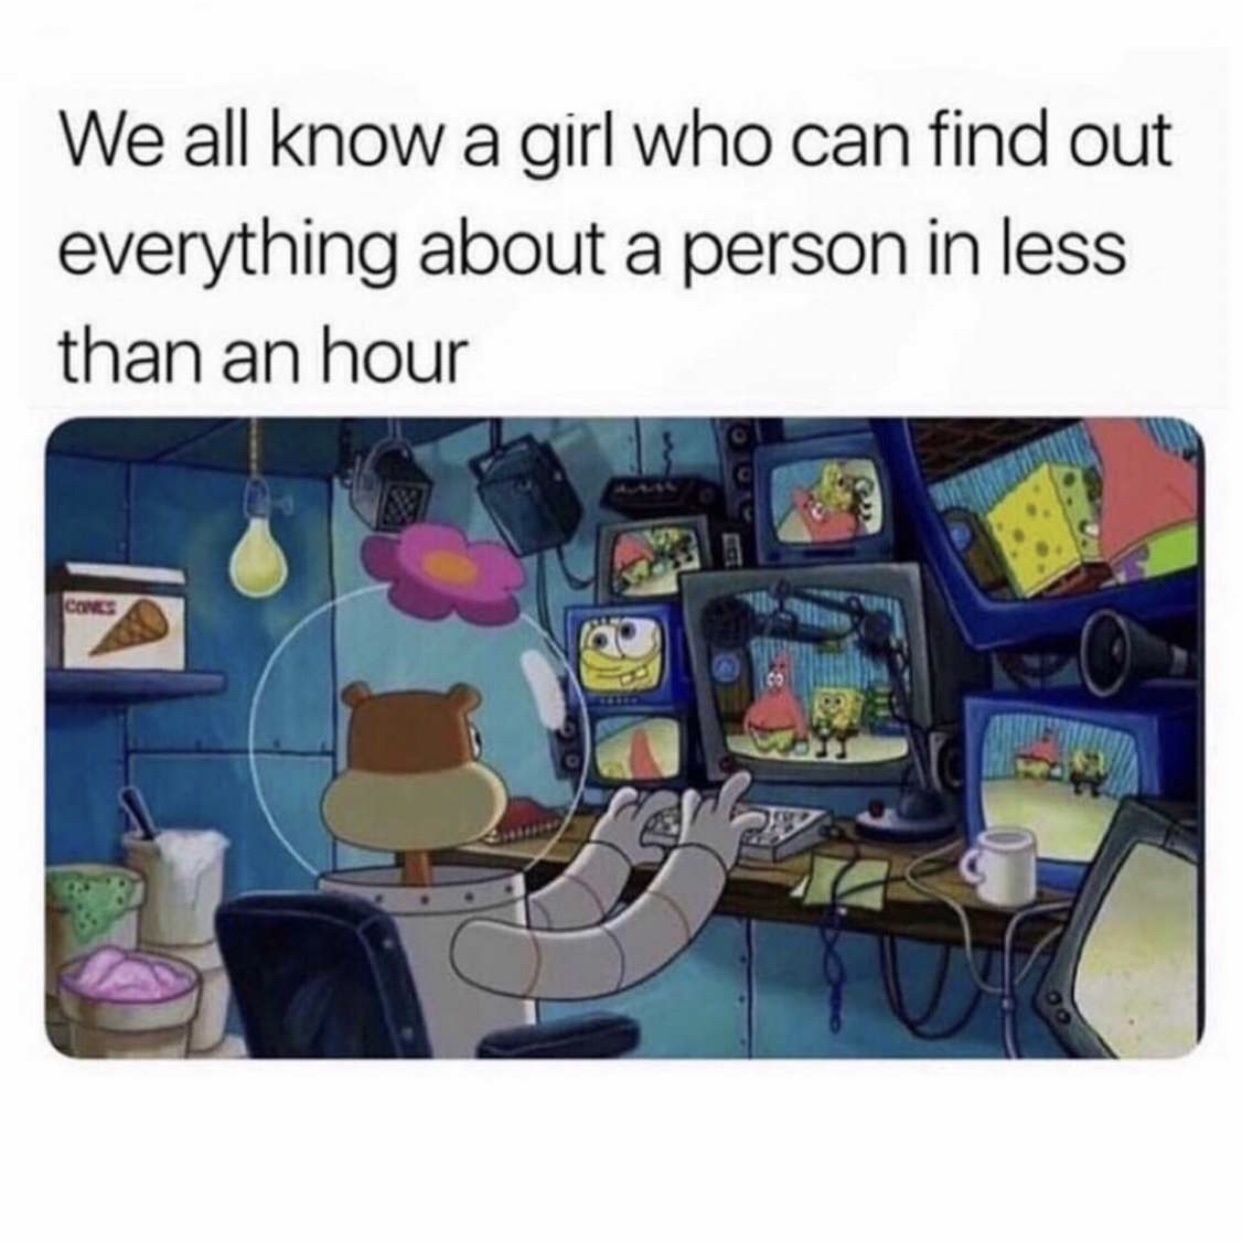 spongebob relatable memes - We all know a girl who can find out everything about a person in less than an hour